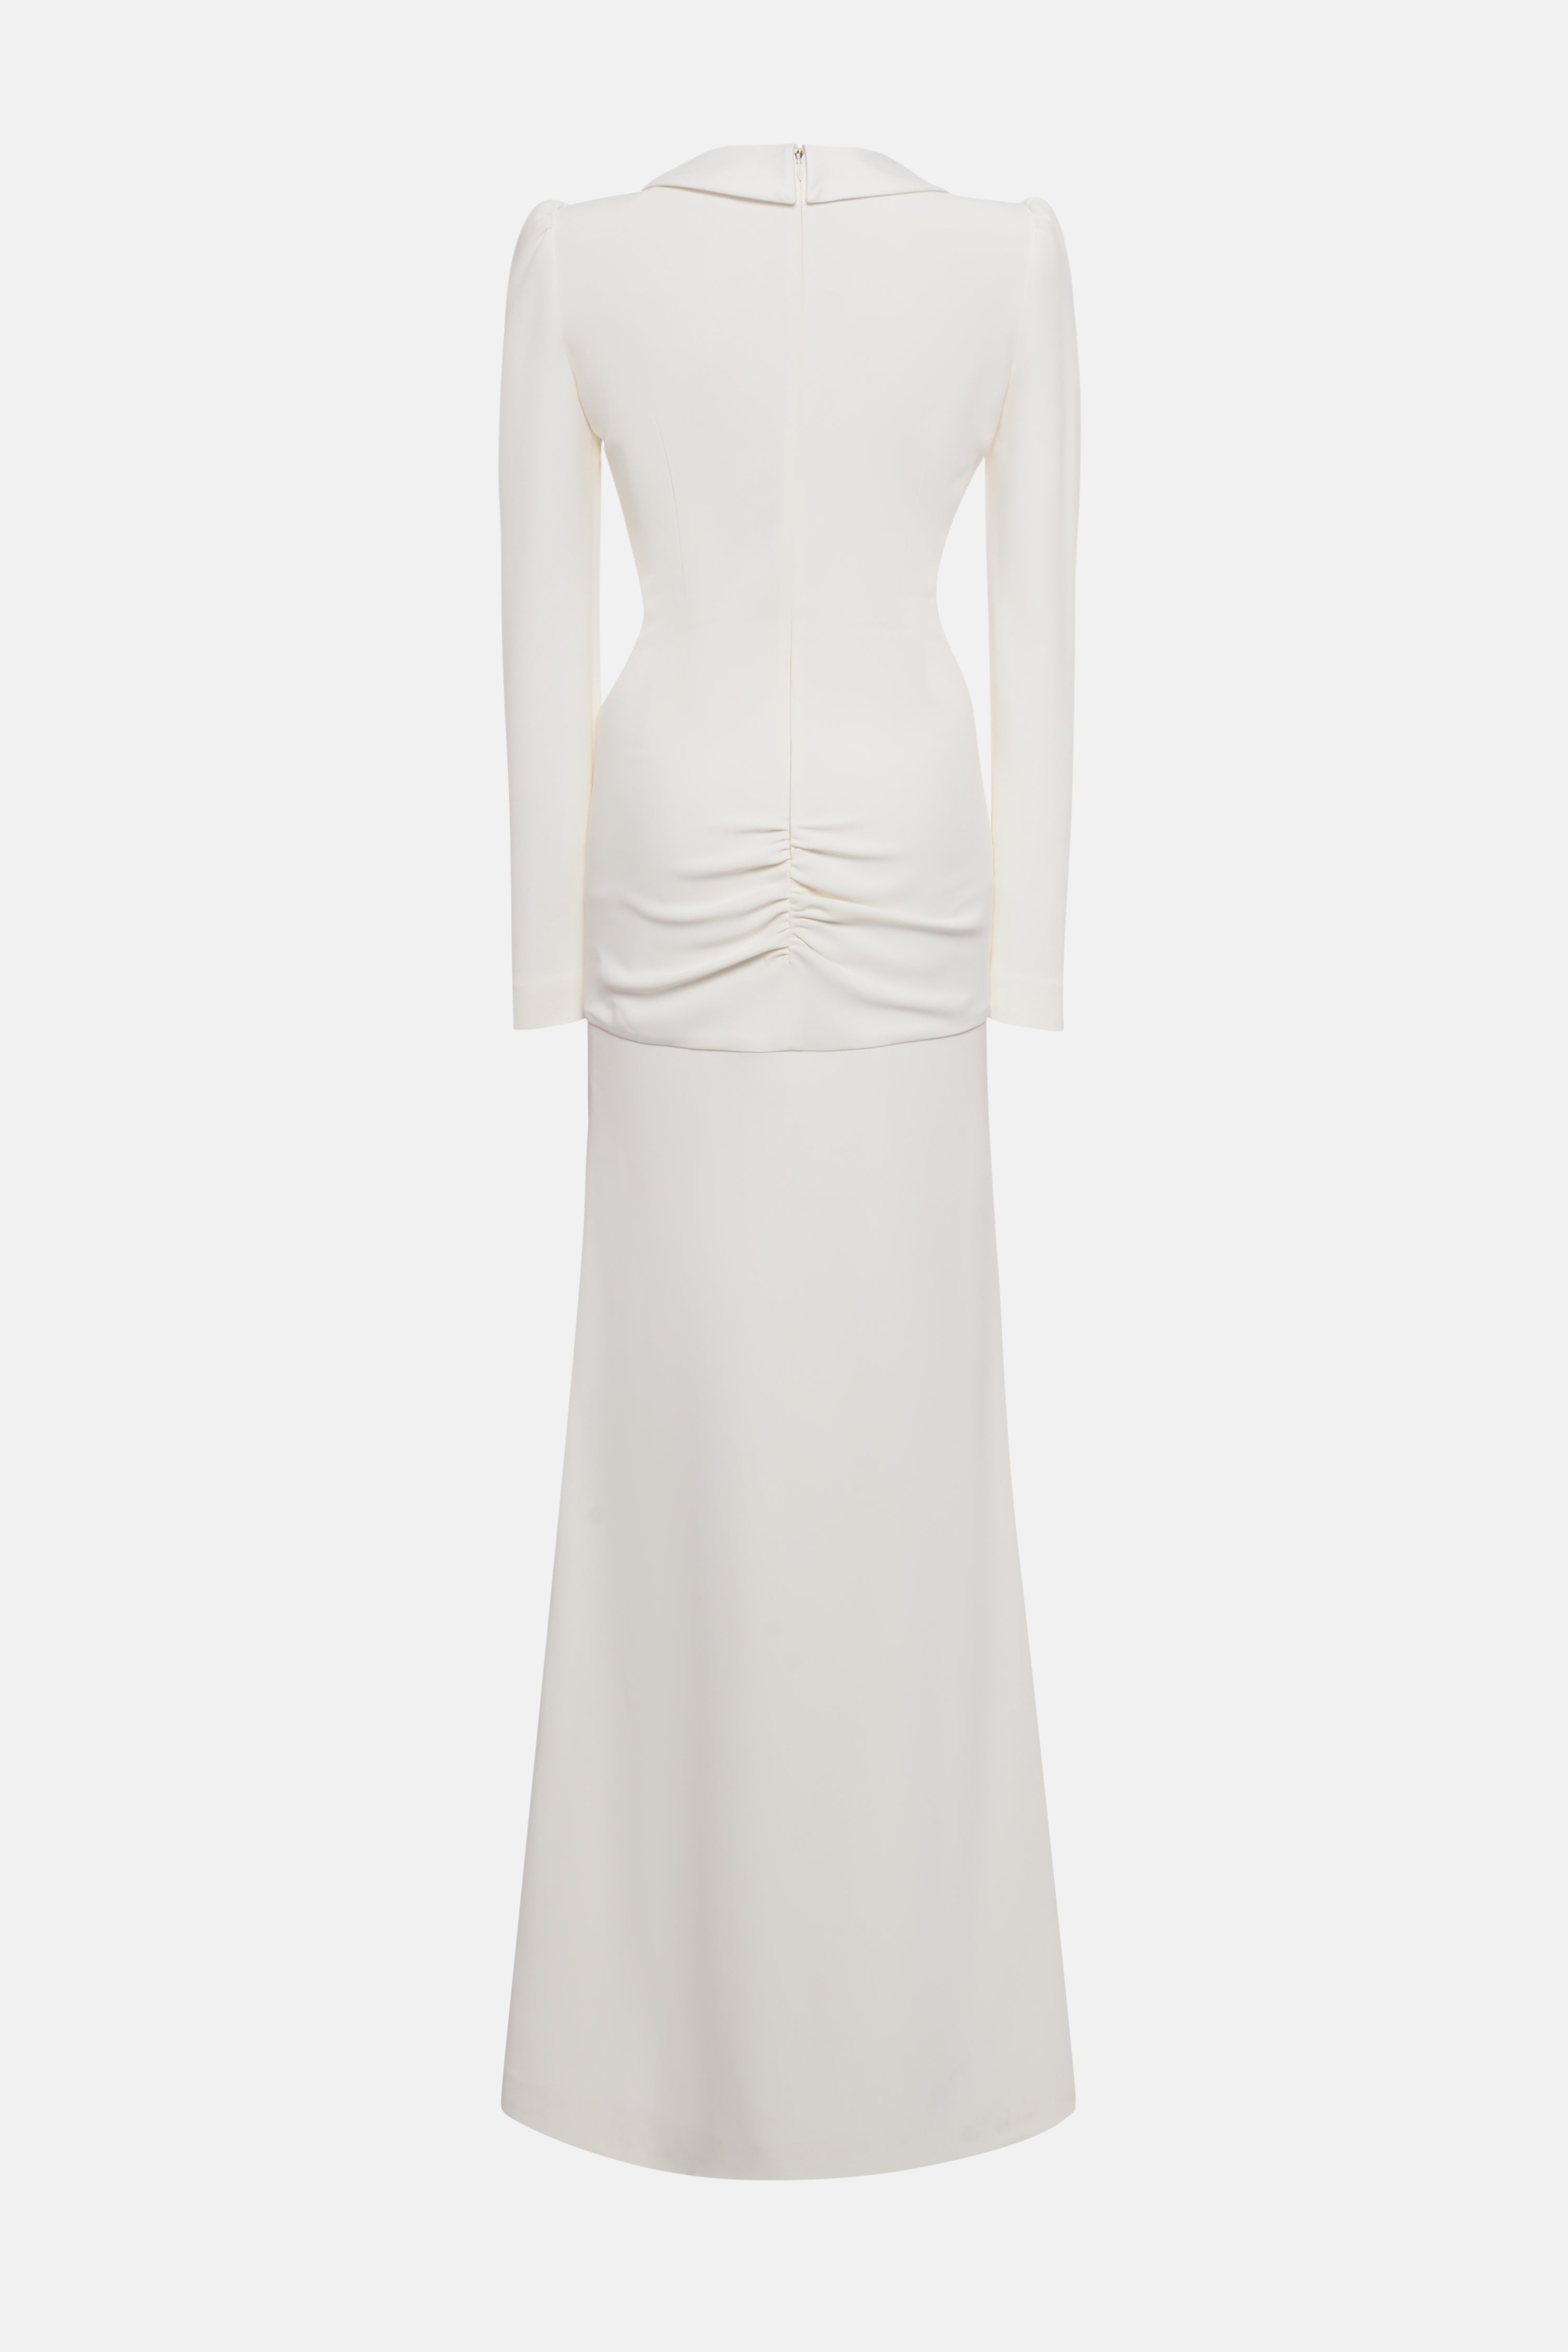 CADY EVENING DRESS WITH MIKADO COLLAR, ROSE DETAIL